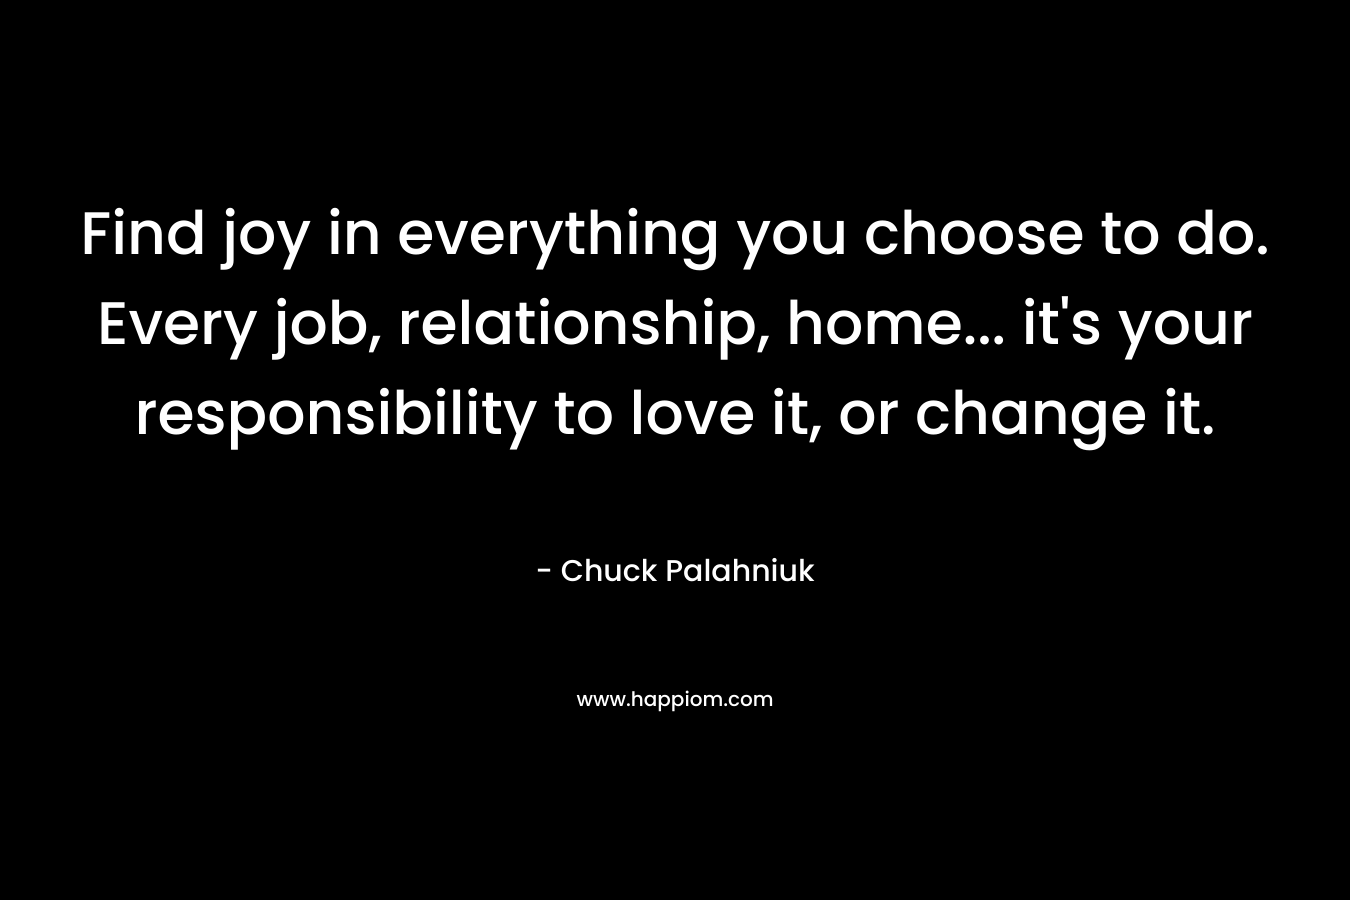 Find joy in everything you choose to do. Every job, relationship, home... it's your responsibility to love it, or change it.